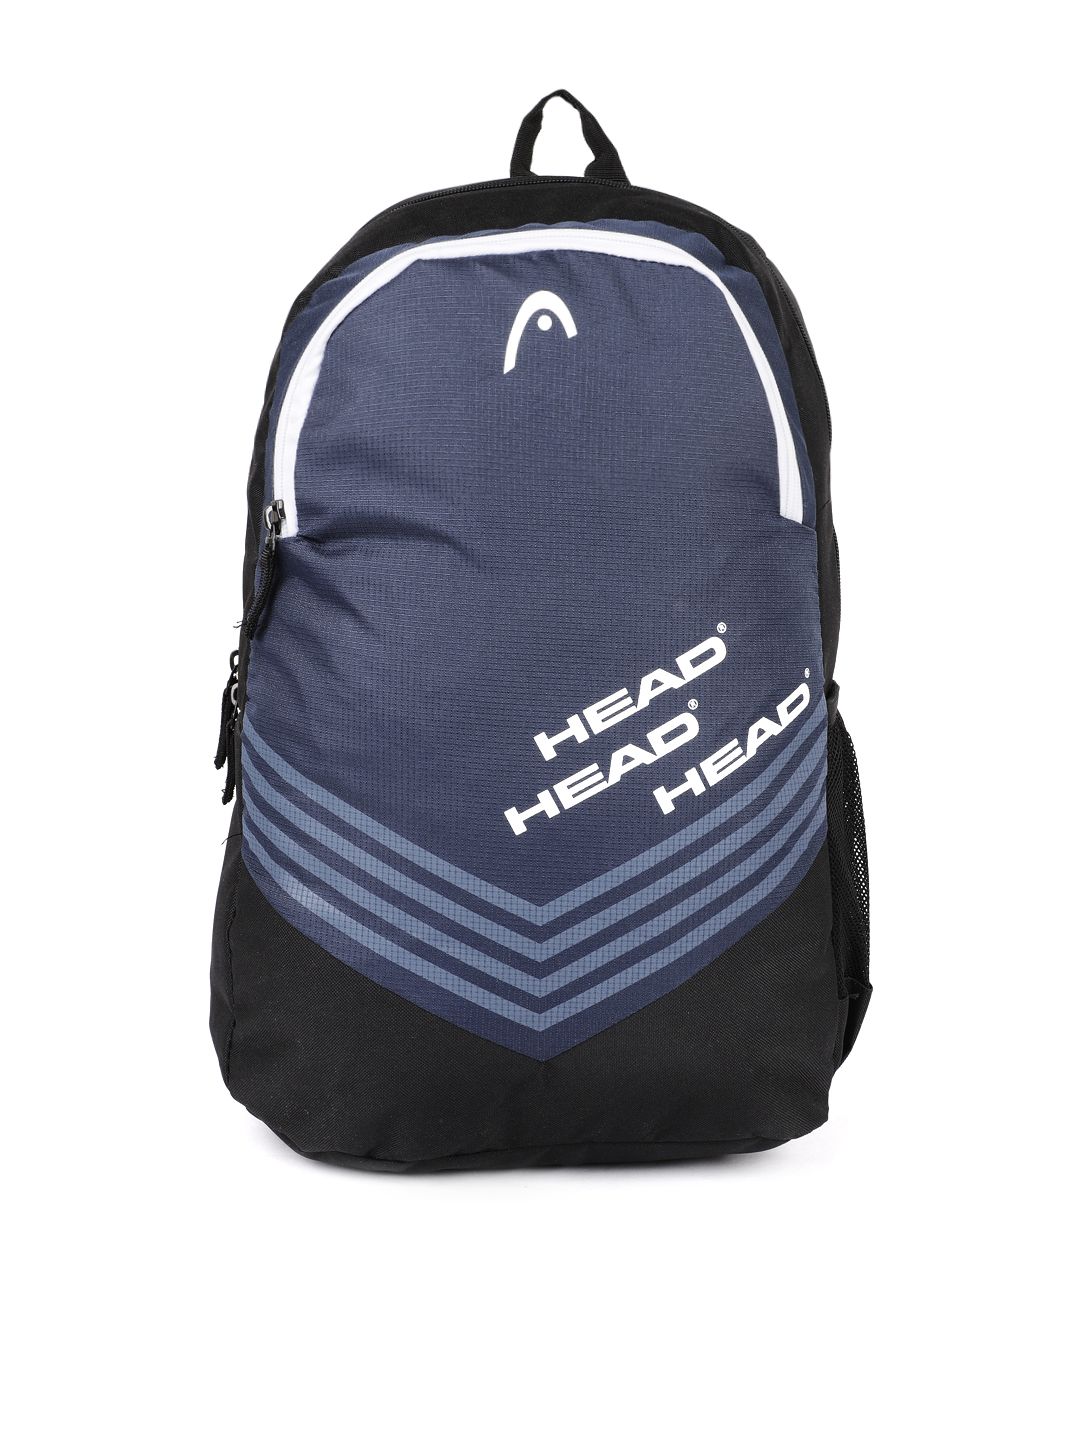 Head Unisex Navy Blue & Black Brand Logo Volley Backpack Price in India